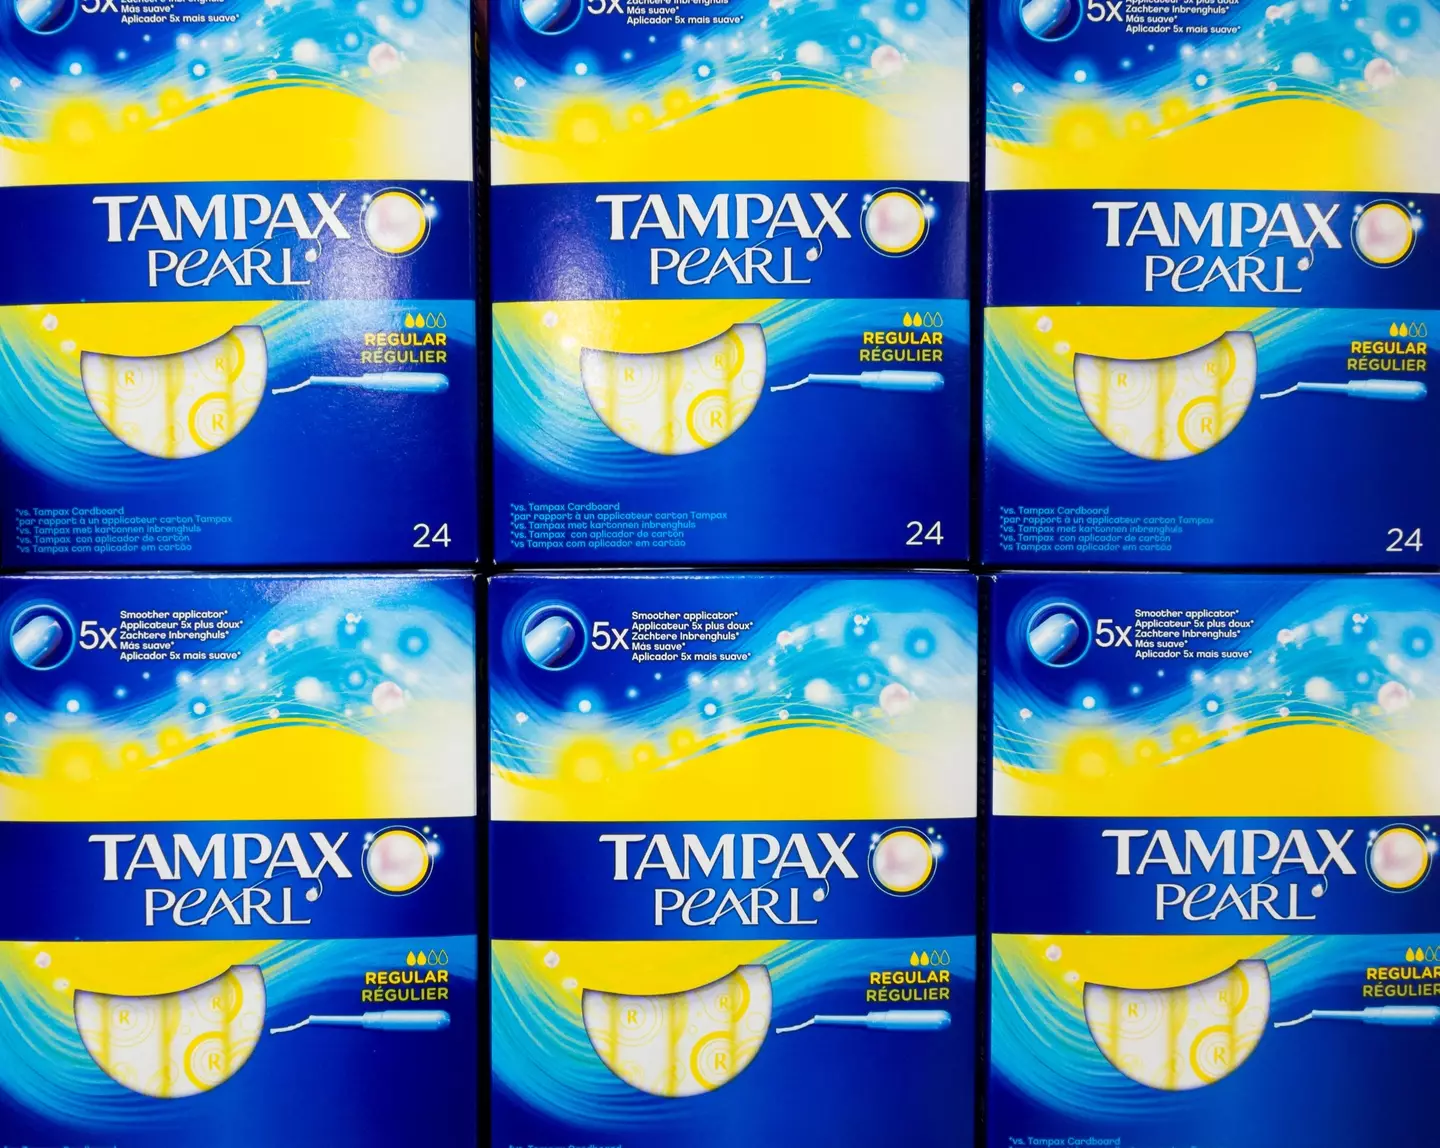 Tampax has shared a controversial tweet.